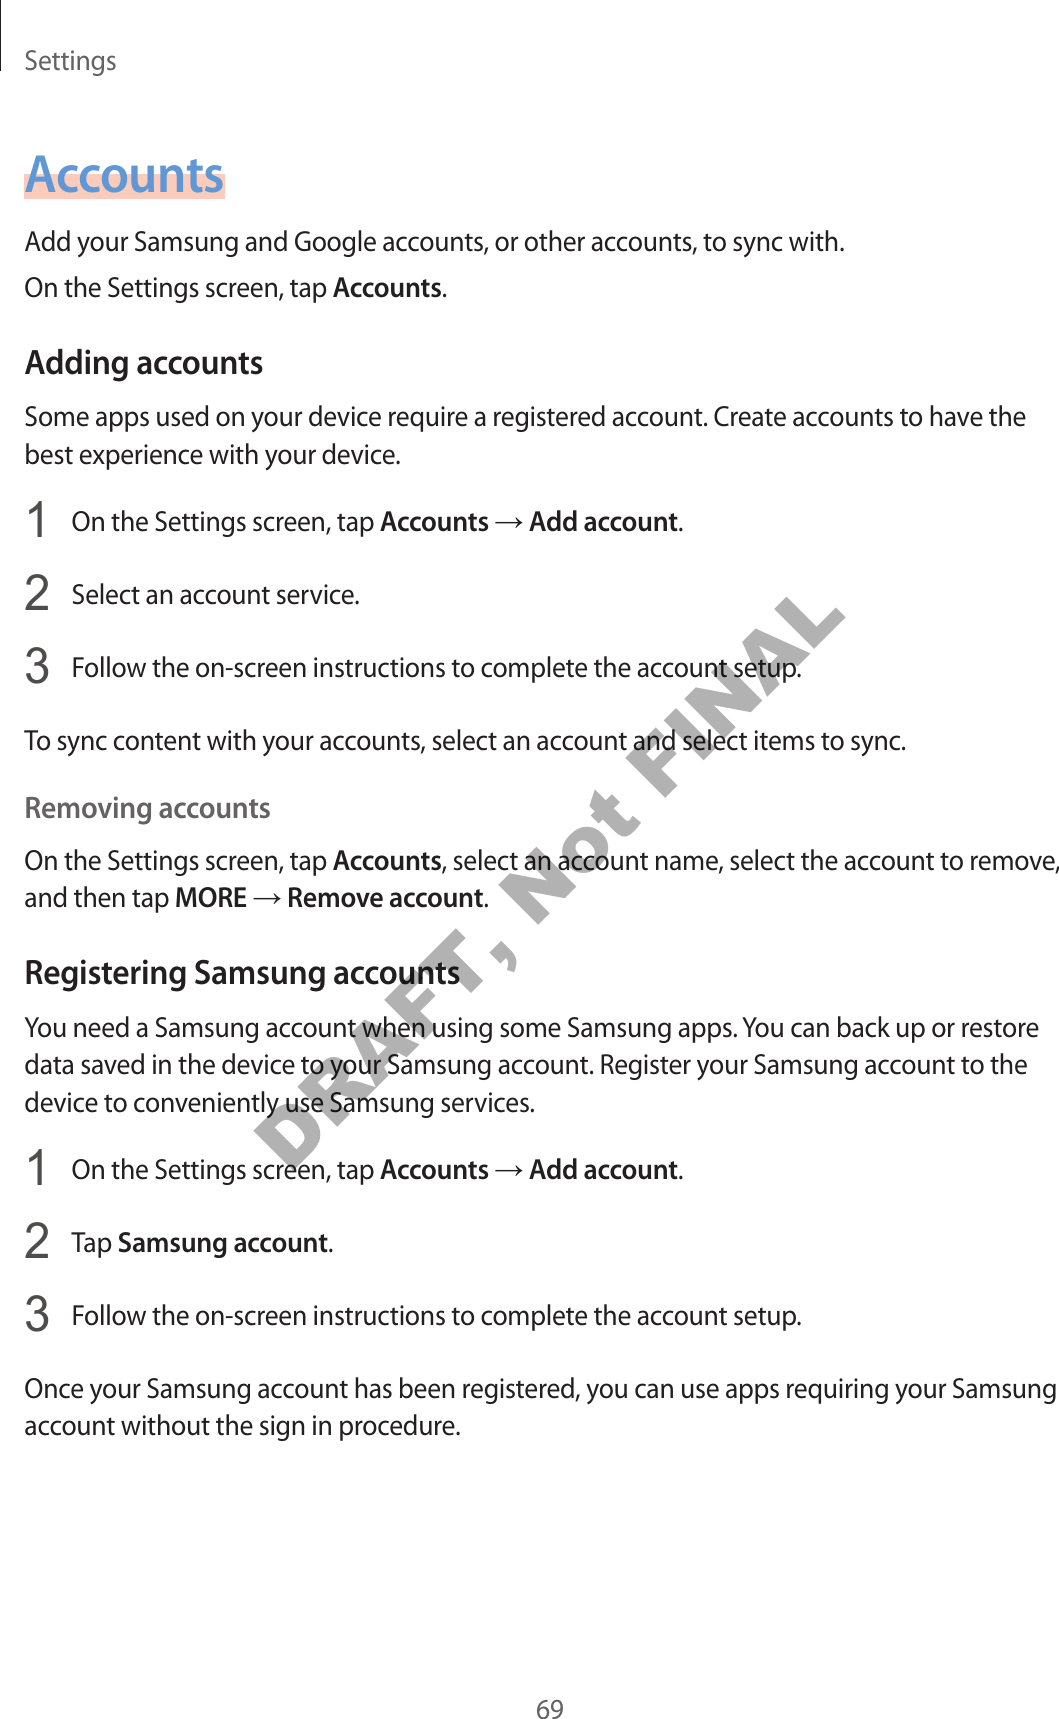 Settings69AccountsAdd y our Samsung and Google accoun ts , or other acc ounts, to sync with.On the Settings screen, tap Accounts.Adding ac c oun tsSome apps used on your device r equir e a r egist er ed ac coun t. Cr ea te ac coun ts to ha v e the best experience with your devic e .1  On the Settings screen, tap Accounts → Add ac c ount.2  Select an accoun t service.3  Follow the on-screen instructions to complete the ac coun t setup.To sync conten t with y our acc ounts , select an accoun t and select items to sync .Removing acc oun tsOn the Settings screen, tap Accounts, select an account name, select the accoun t to r emo v e , and then tap MORE → Remov e acc oun t.Registering Samsung acc ountsYou need a Samsung account when using some Samsung apps. You can back up or restore data sav ed in the devic e to y our Samsung acc ount . Regist er y our Samsung accoun t to the device to c on v eniently use Samsung services.1  On the Settings screen, tap Accounts → Add ac c ount.2  Tap Samsung account.3  Follow the on-screen instructions to complete the ac coun t setup.Once your Samsung ac coun t has been r egist er ed , y ou can use apps r equiring your Samsung account without the sig n in pr oc edur e .DRAFT, Not FINAL